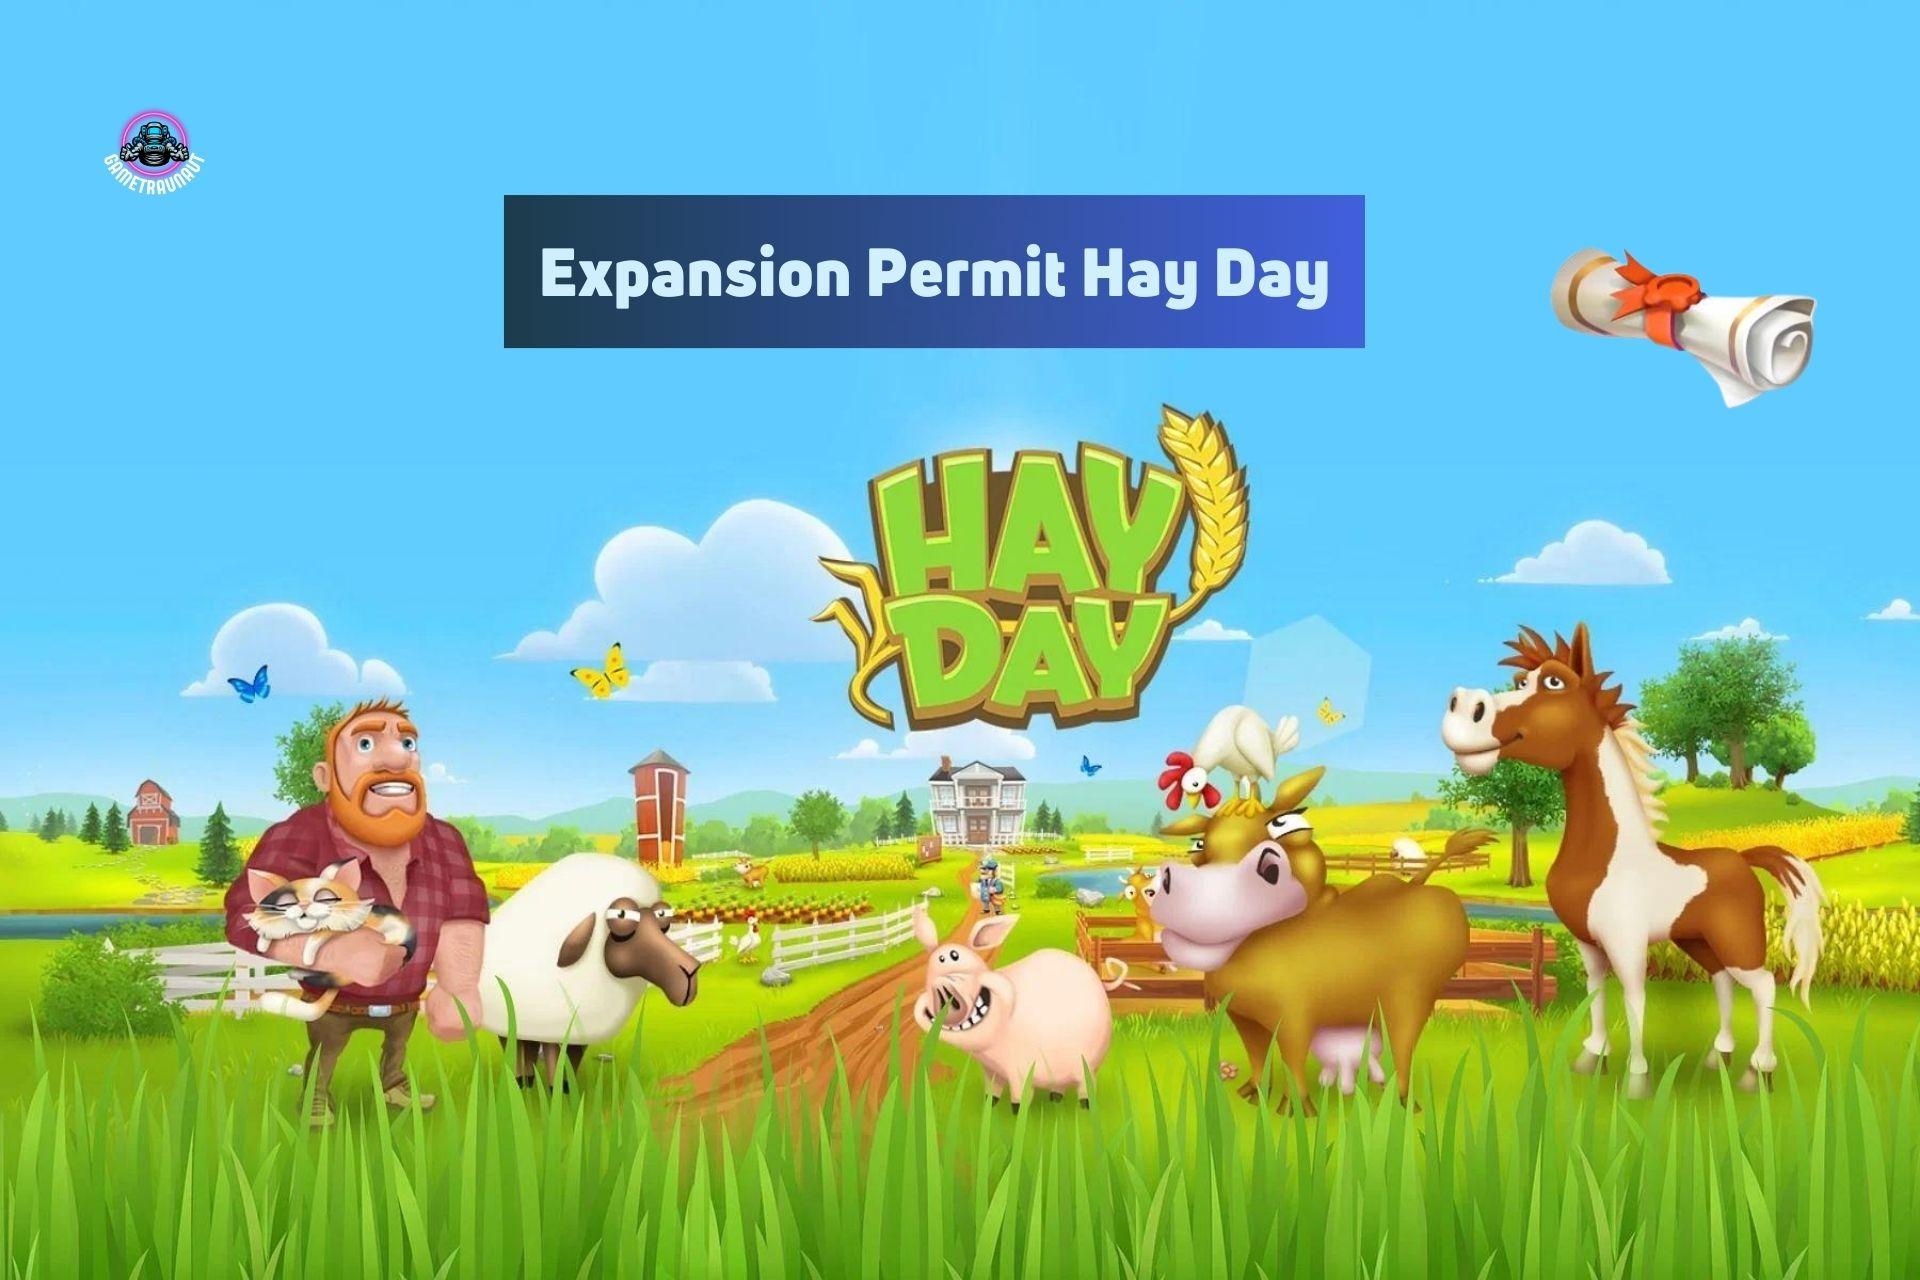 Expansion permit Hay day